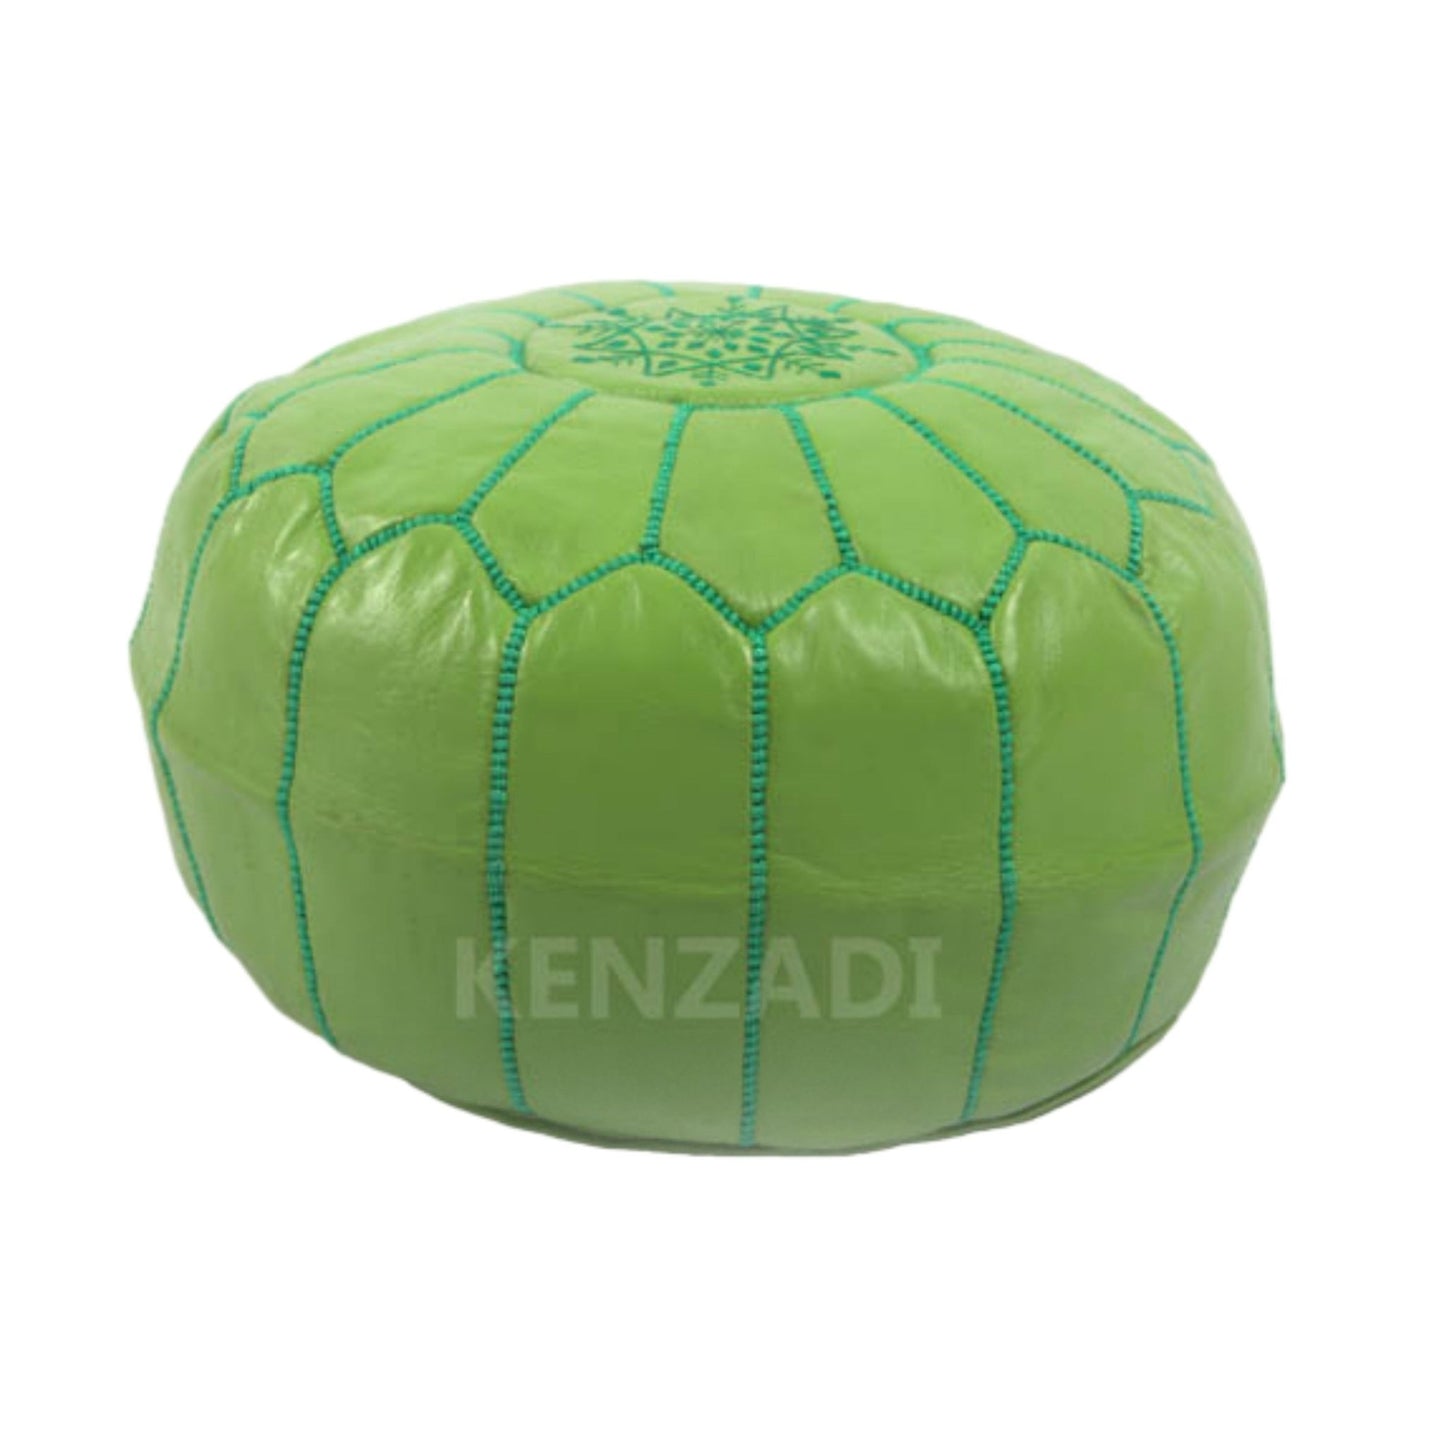 Moroccan leather pouf, round pouf, berber pouf, Light Green with Green embroidery by Kenzadi - Handmade by My Poufs